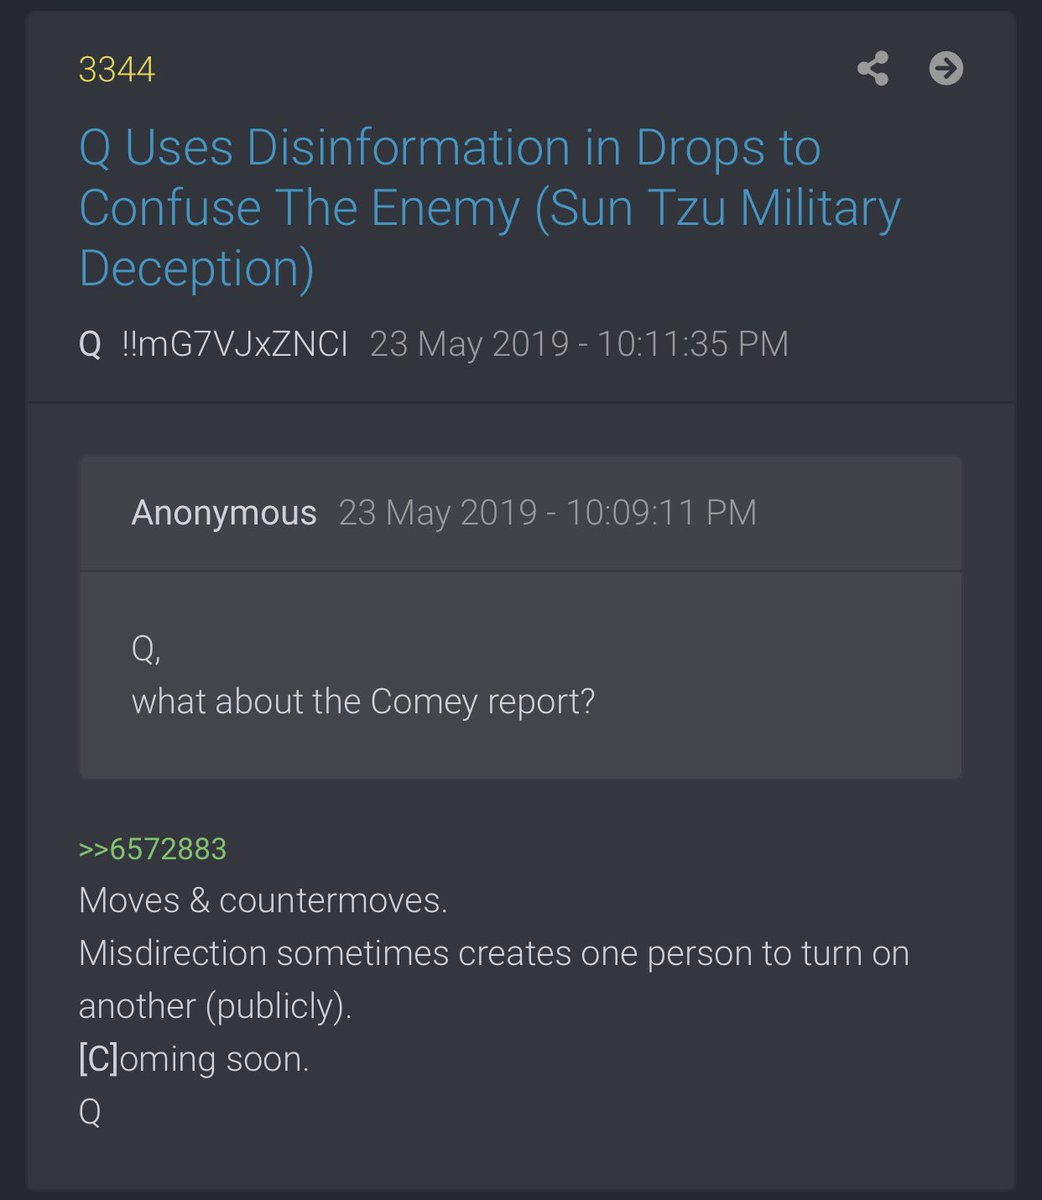 @VincentCrypt46 ‘Confusion’ by itself.🤔 And the unnecessary ‘s’ Looked up Q posts with this word & found this post interesting. (especially with the [C] in brackets) Q 3344 Moves & countermoves. Misdirection sometimes creates one person to turn on another (publicly). [C]oming soon. Q